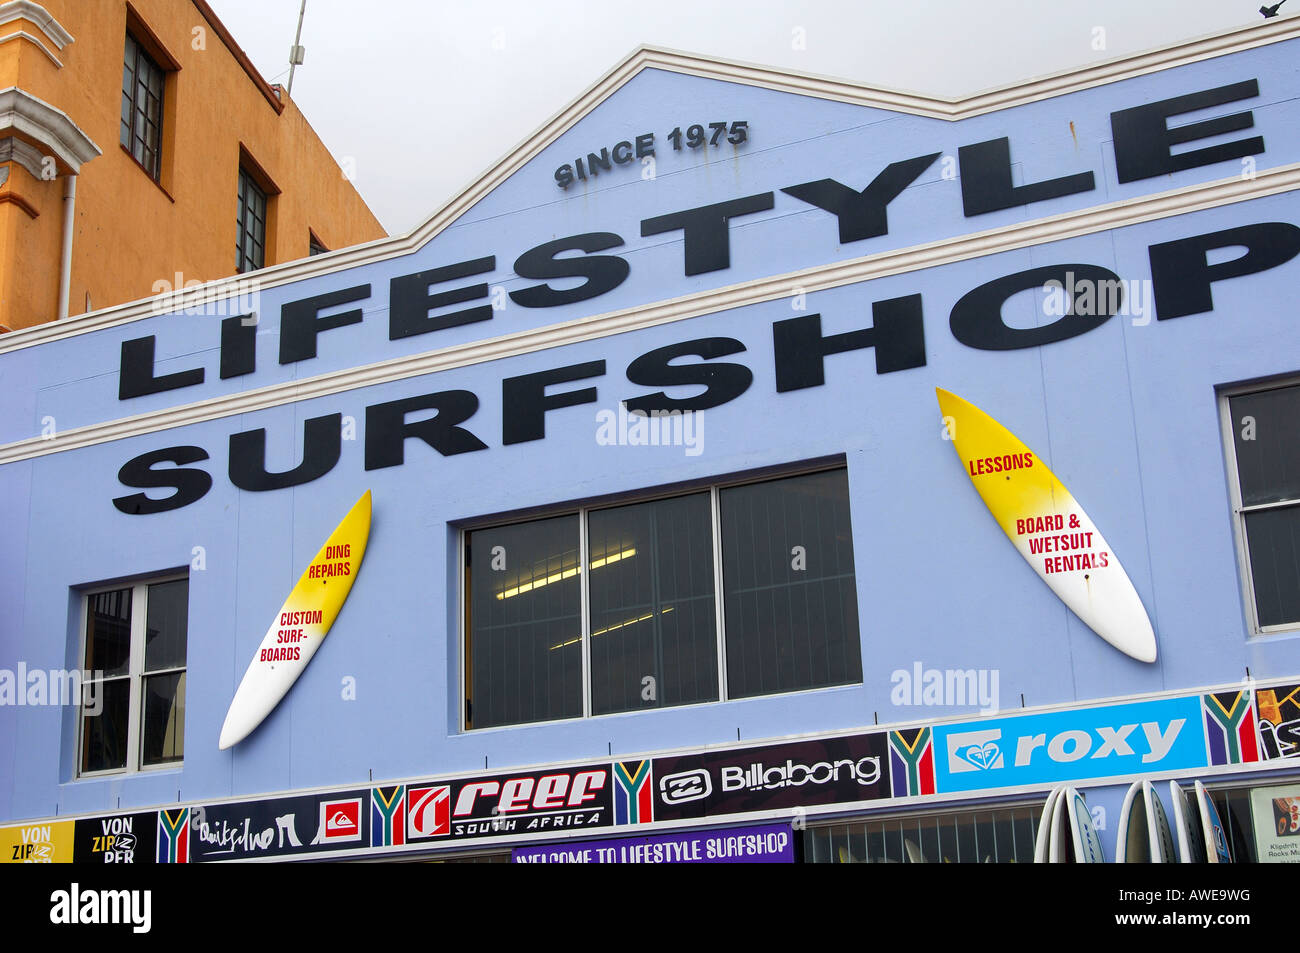 Lifestyle surfshop, Muizenberg, Western Cape Province, South Africa Stock Photo